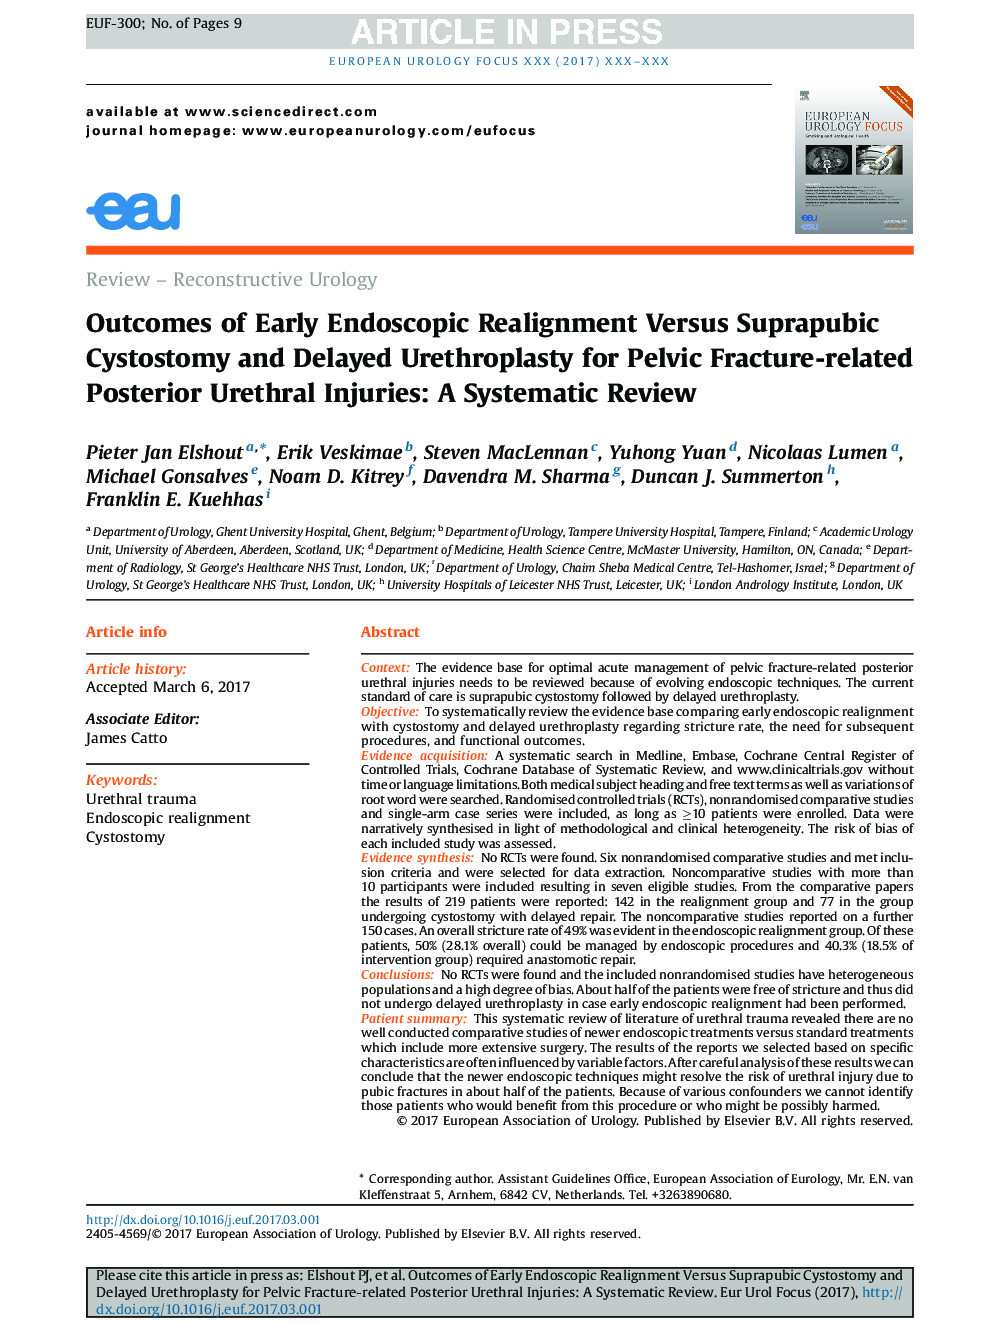 Outcomes of Early Endoscopic Realignment Versus Suprapubic Cystostomy and Delayed Urethroplasty for Pelvic Fracture-related Posterior Urethral Injuries: A Systematic Review